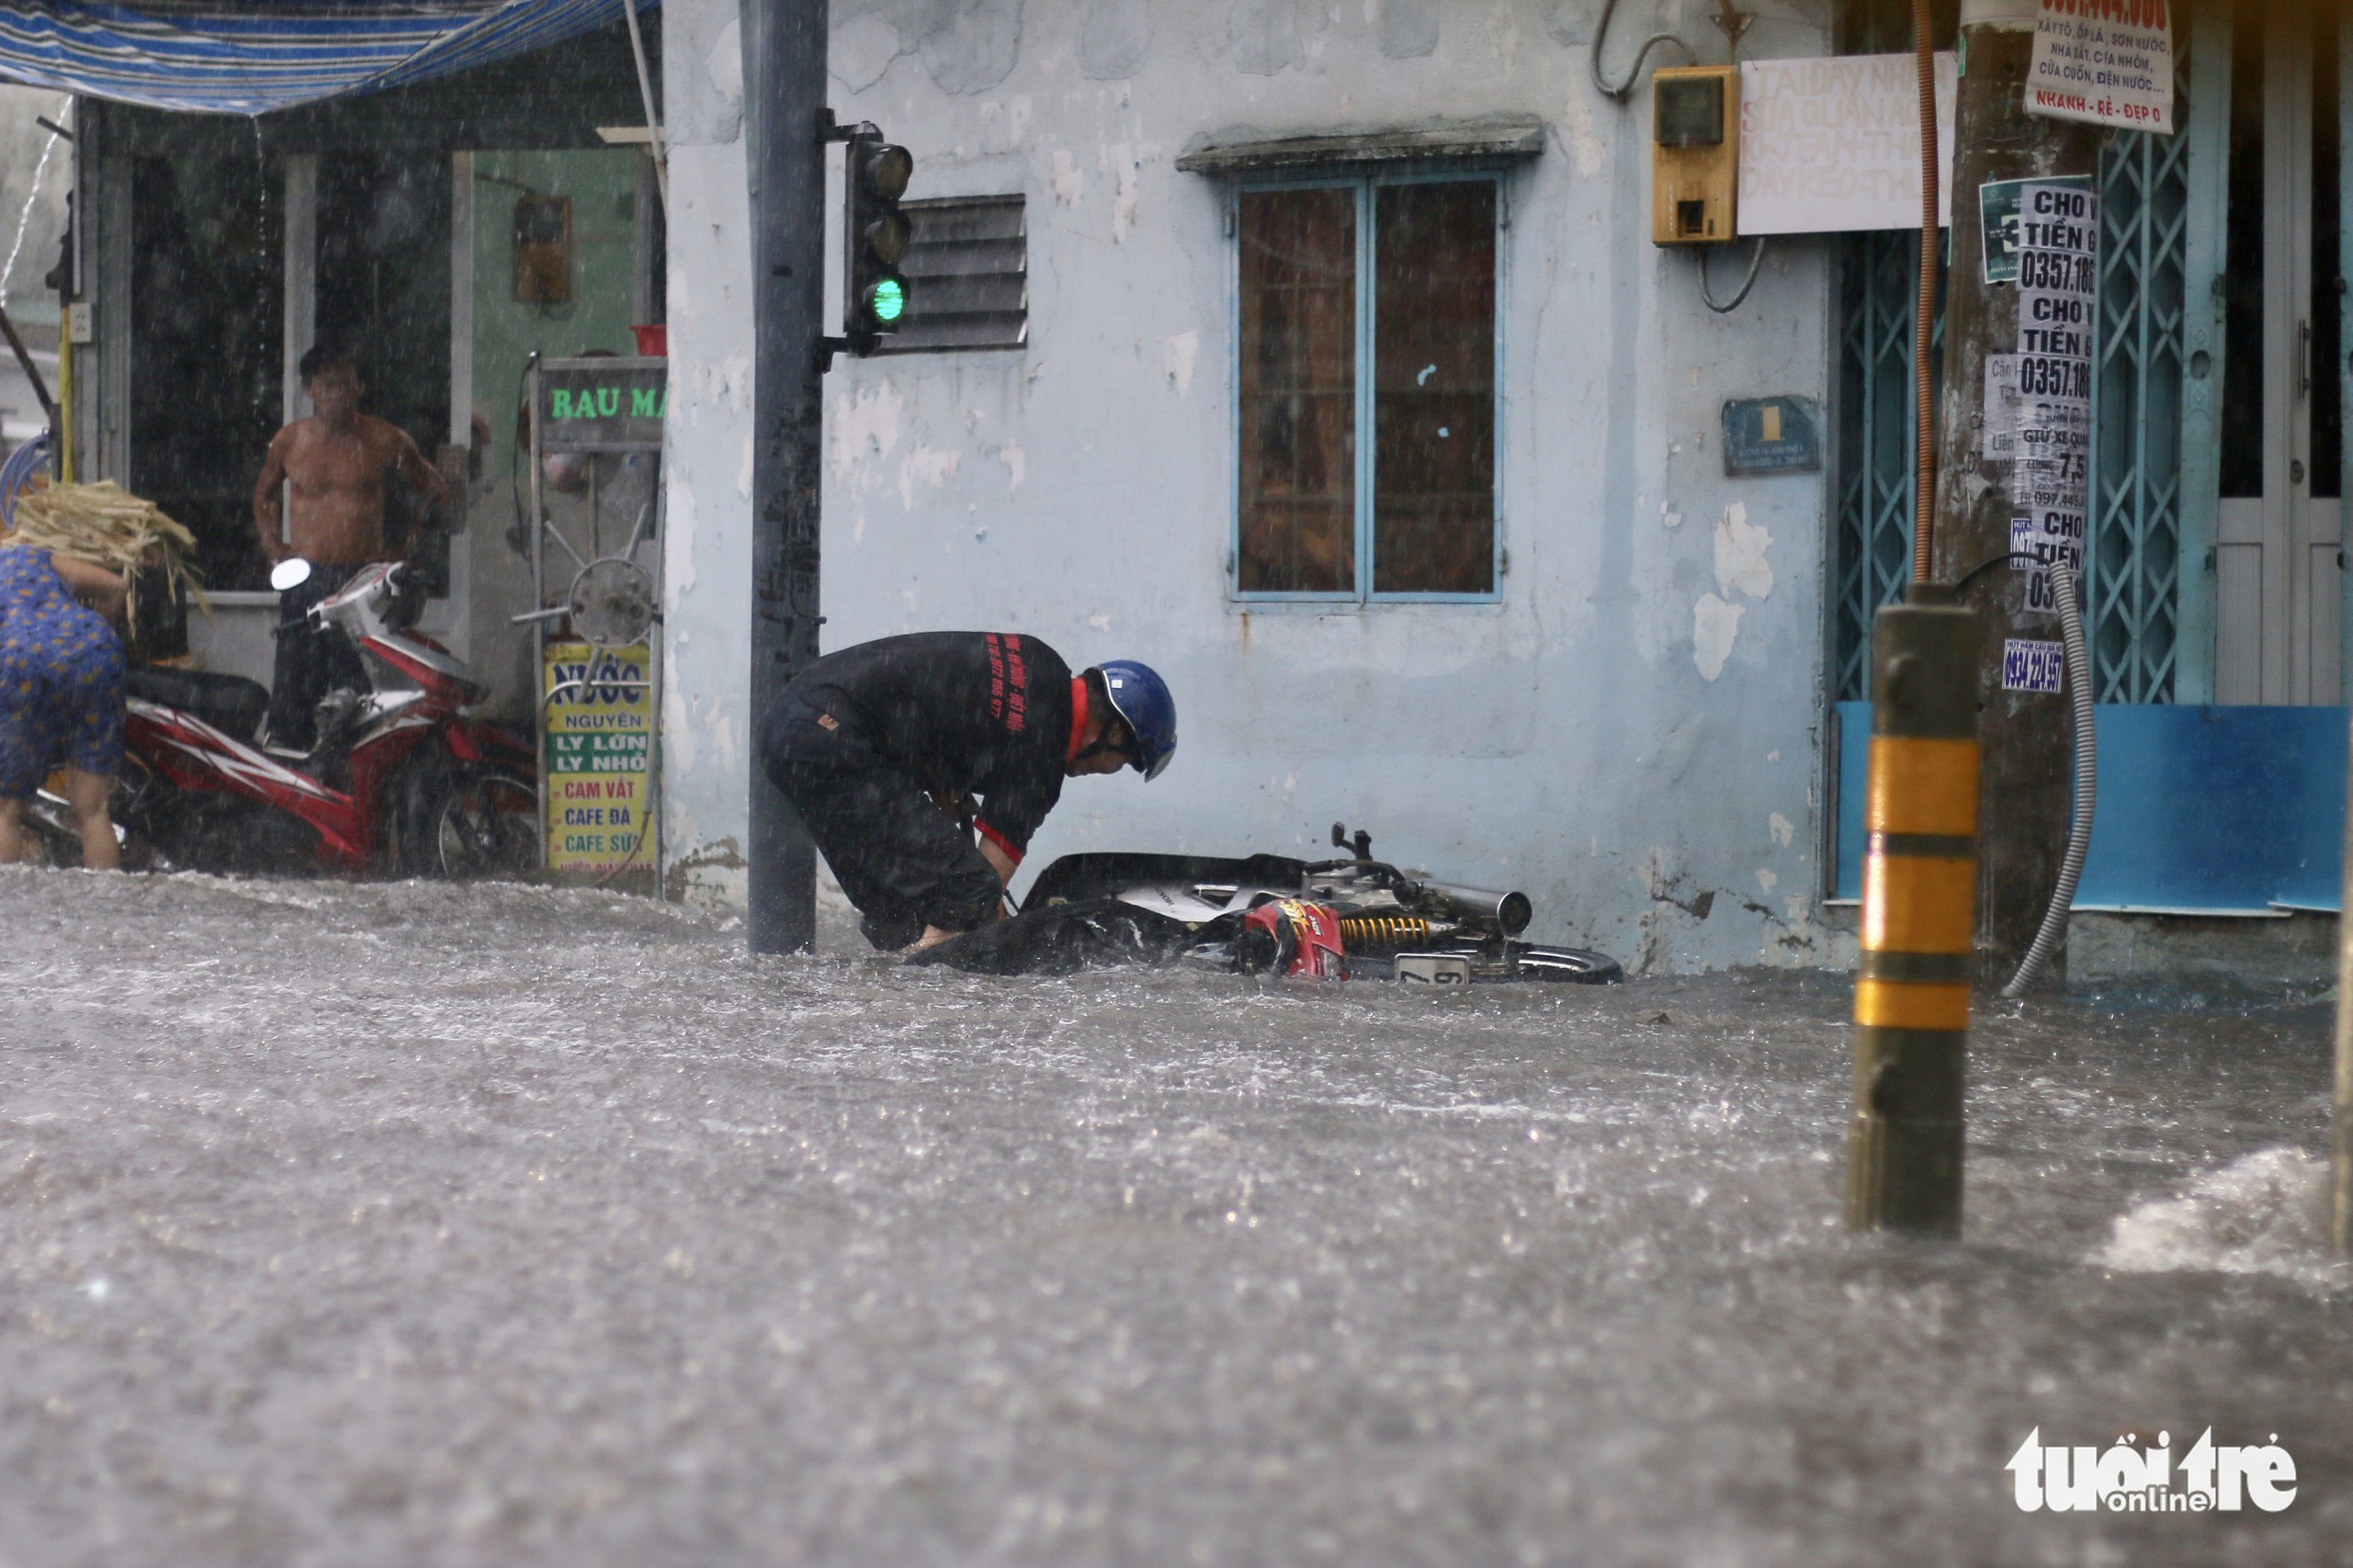 A man falls off his motorbike on an inundated street in Ho Chi Minh City, June 22, 2022. Photo: Tuoi Tre